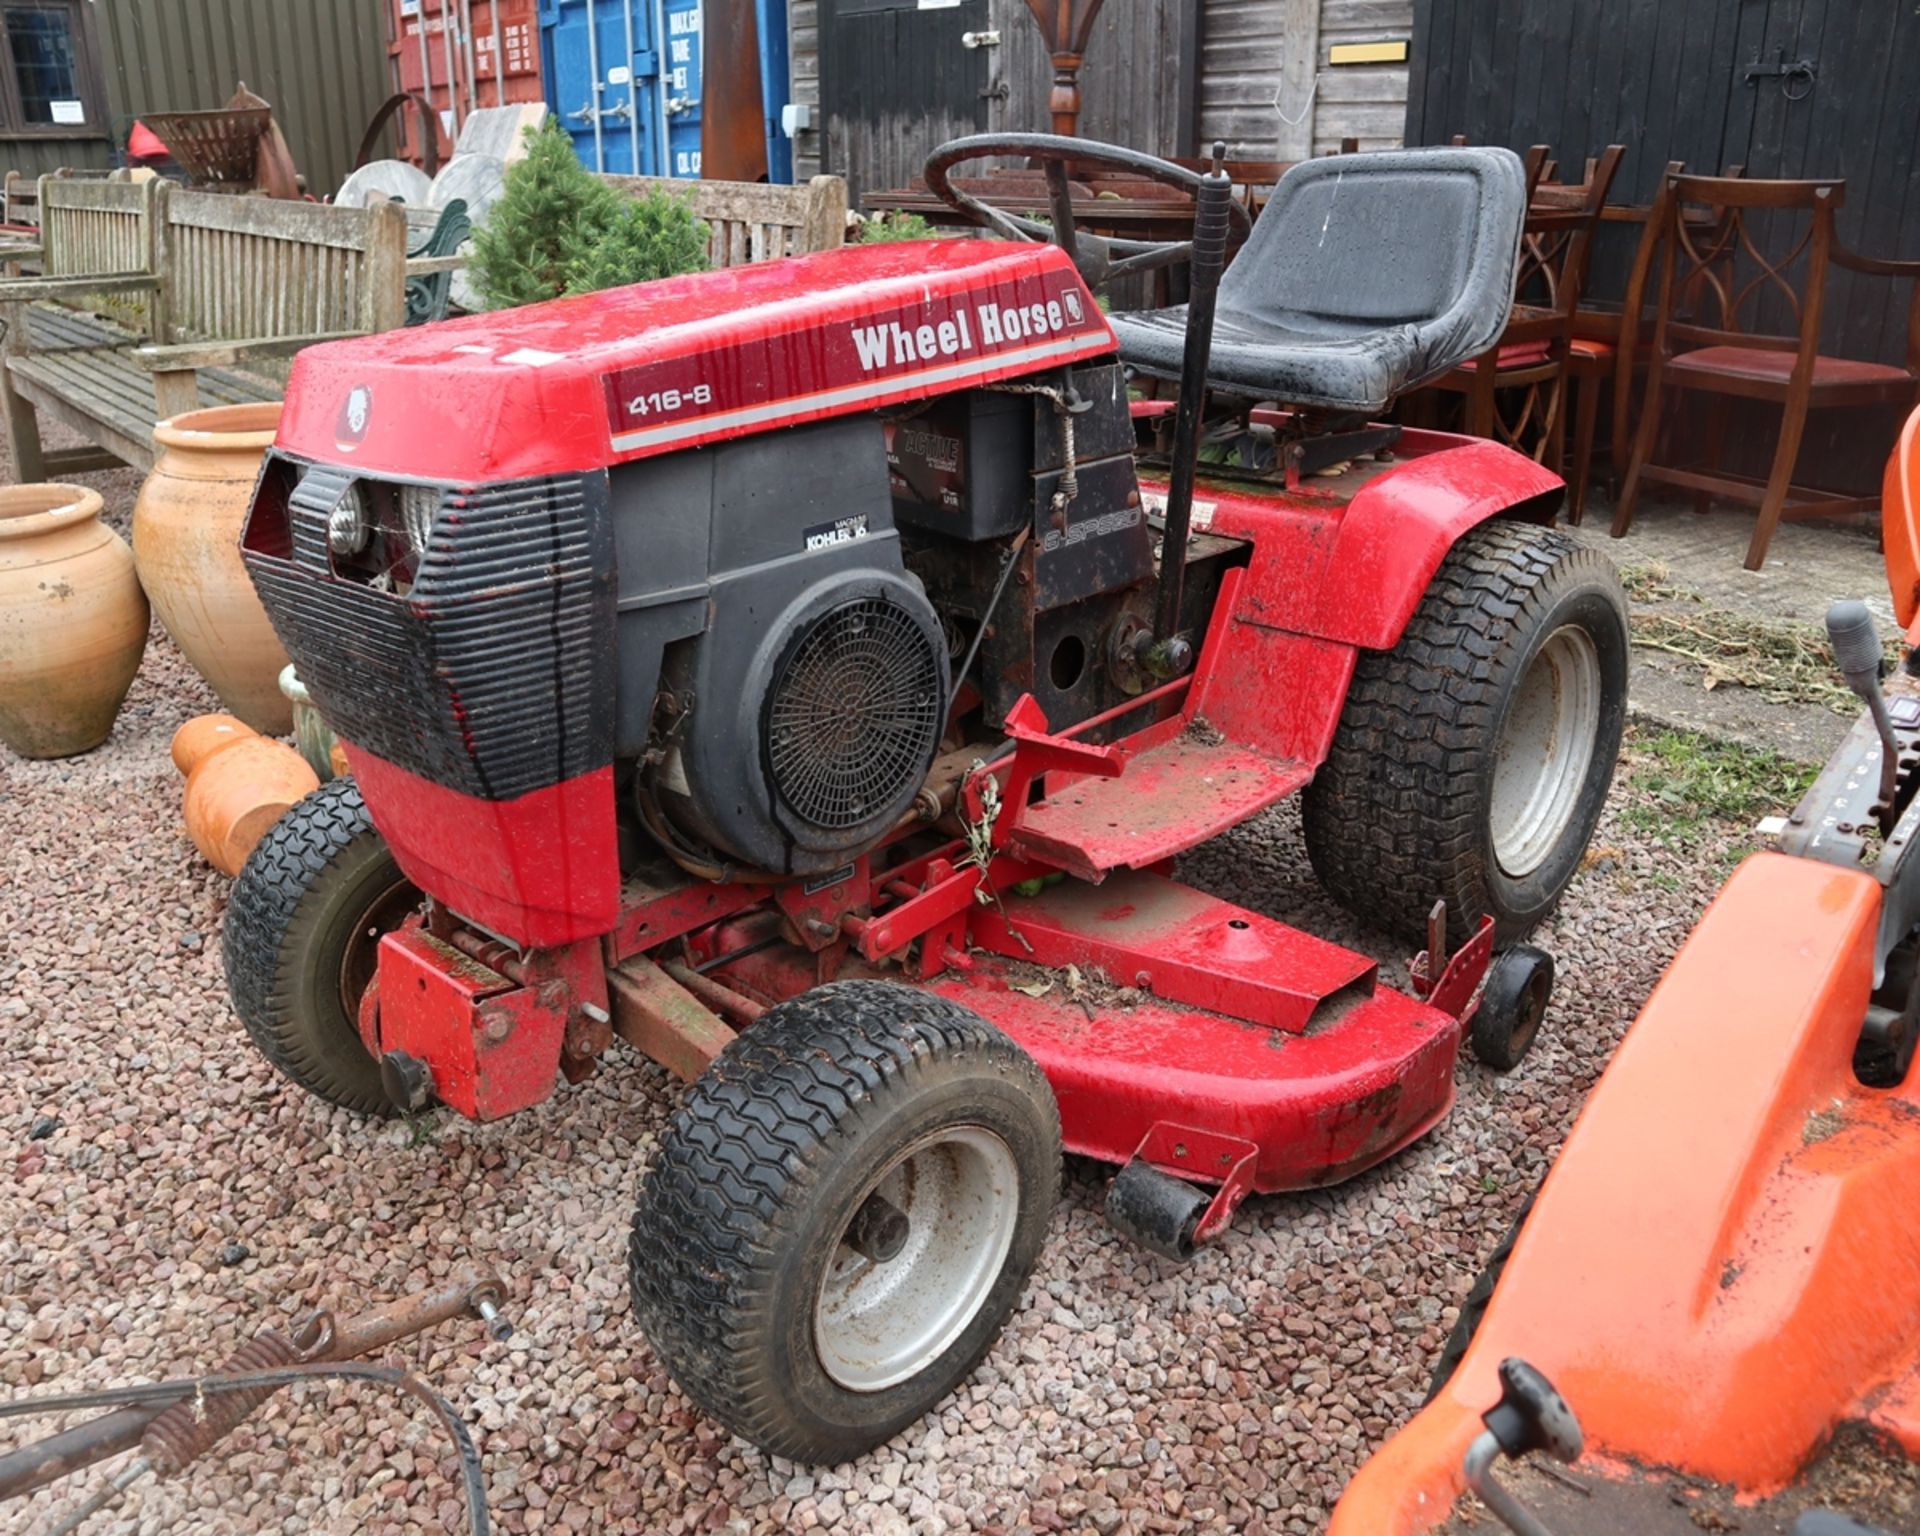 Wheel horse 8 speed ride on lawn mower - flat battery needs minor attention